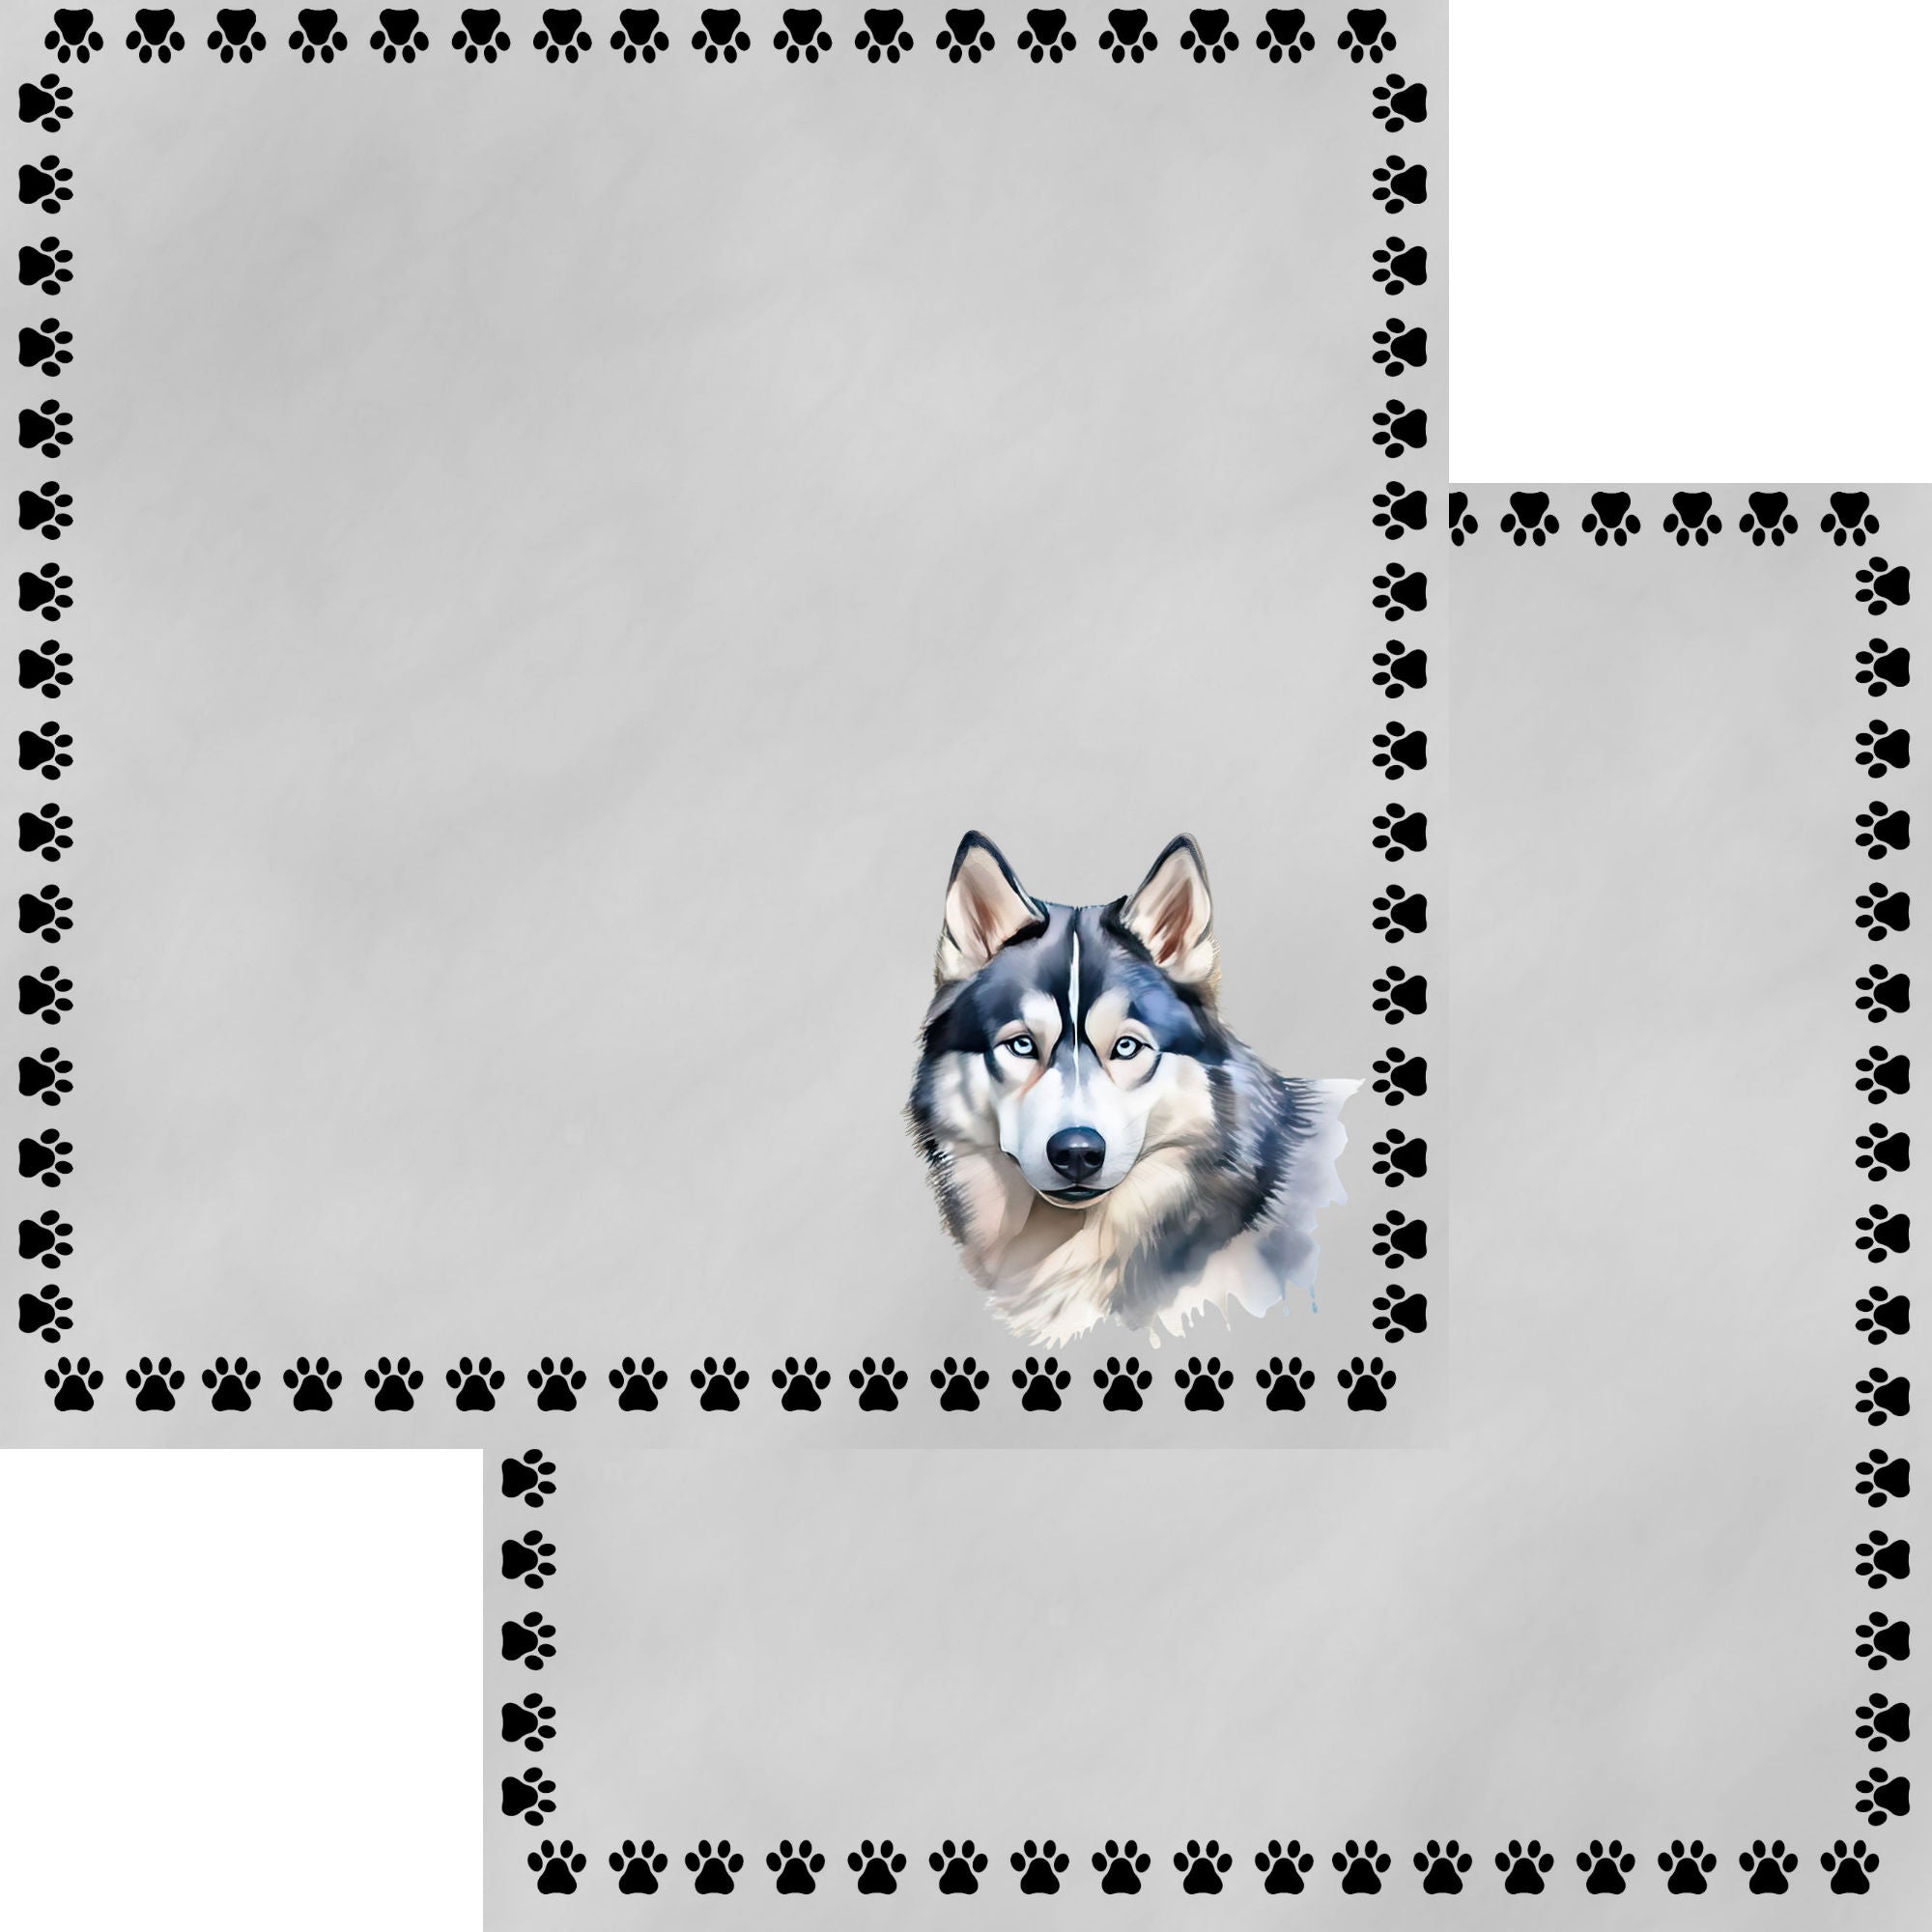 Dog Breeds Collection Husky 12 x 12 Double-Sided Scrapbook Paper by SSC Designs